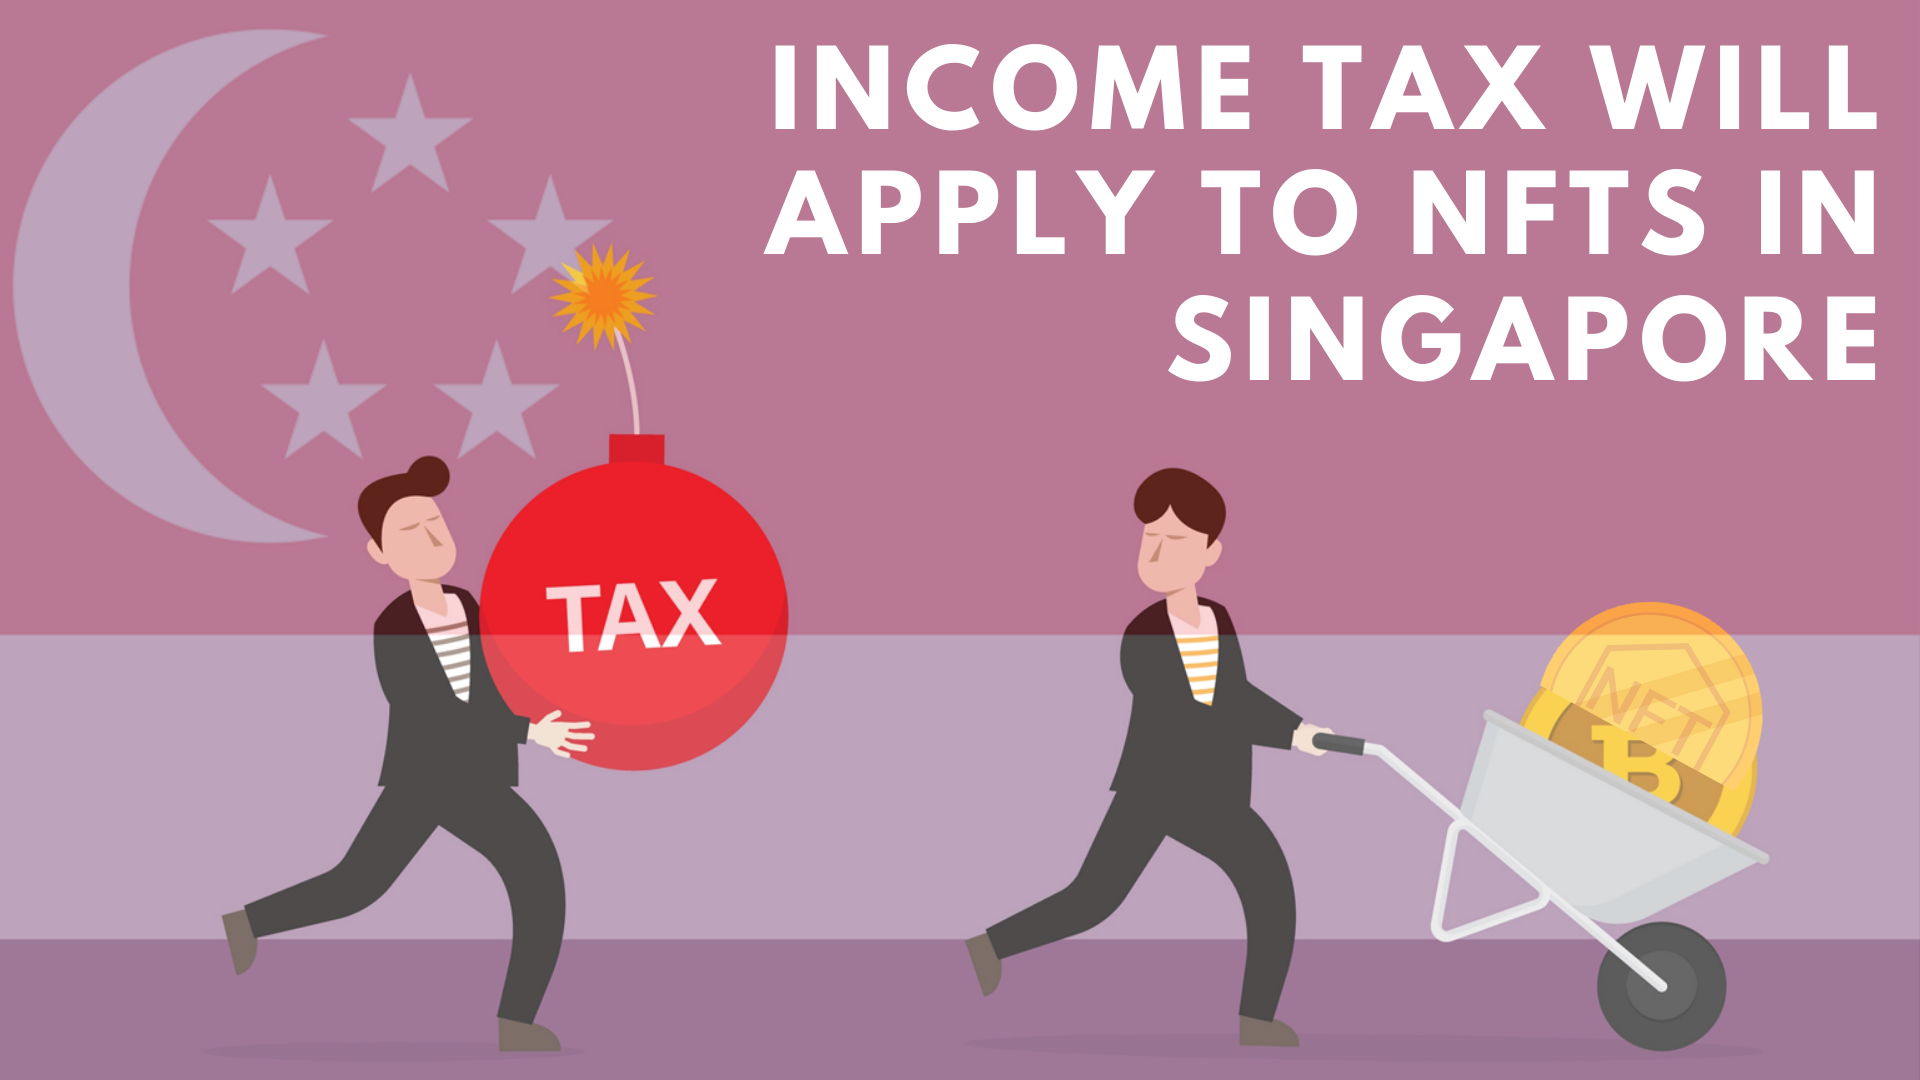 Taxes Imposed On NFTs: Is This The Downfall Of NFTs In Singapore?